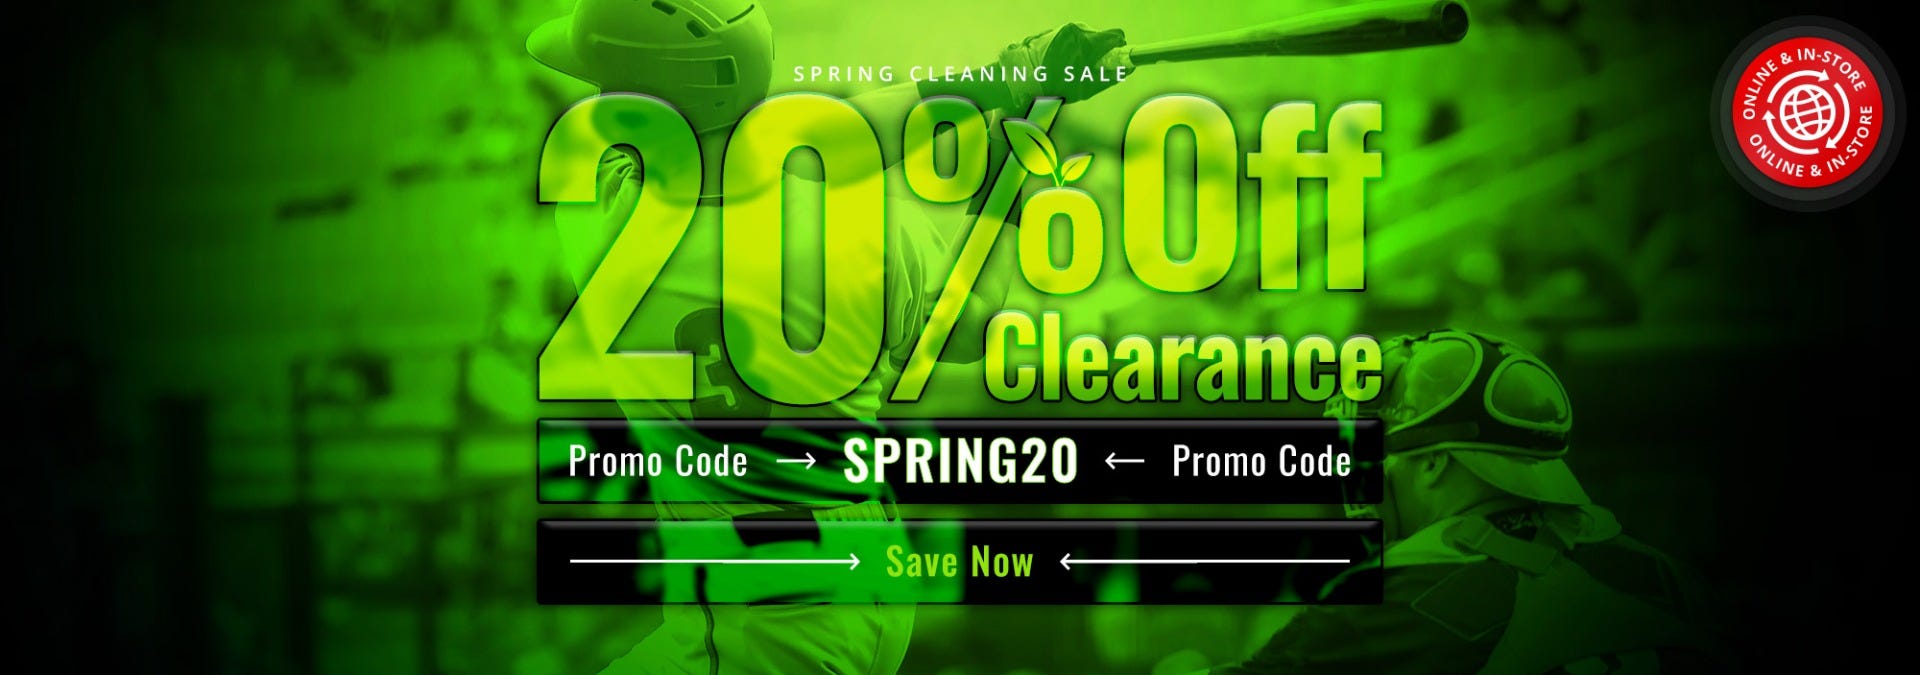 20% Off Clearance